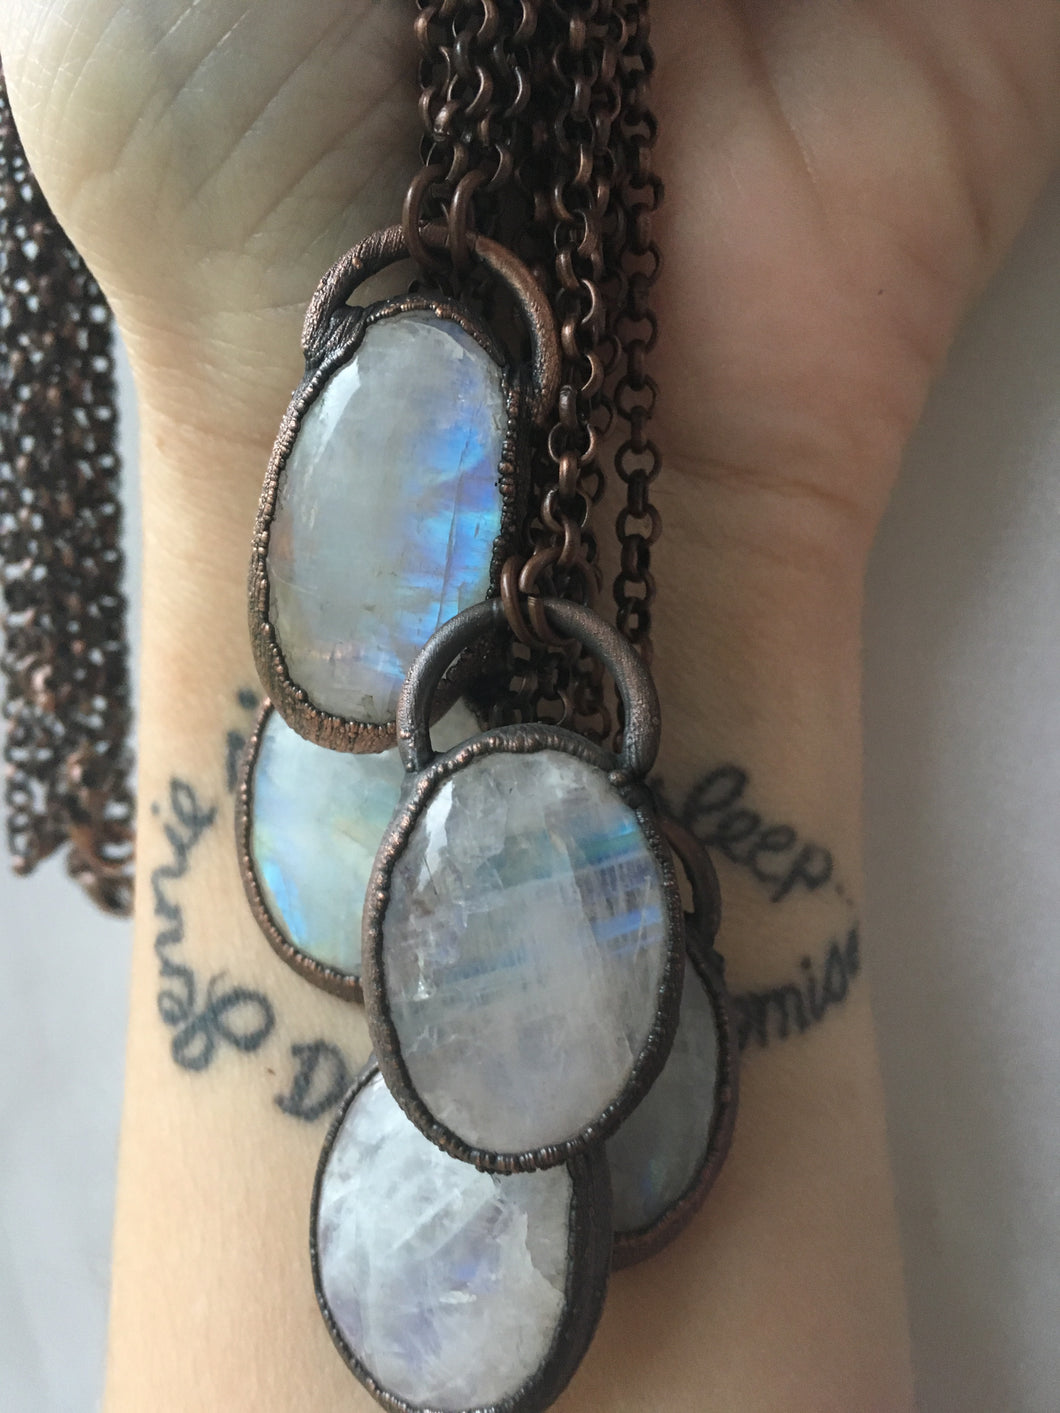 Rainbow Moonstone Necklace - Made to Order